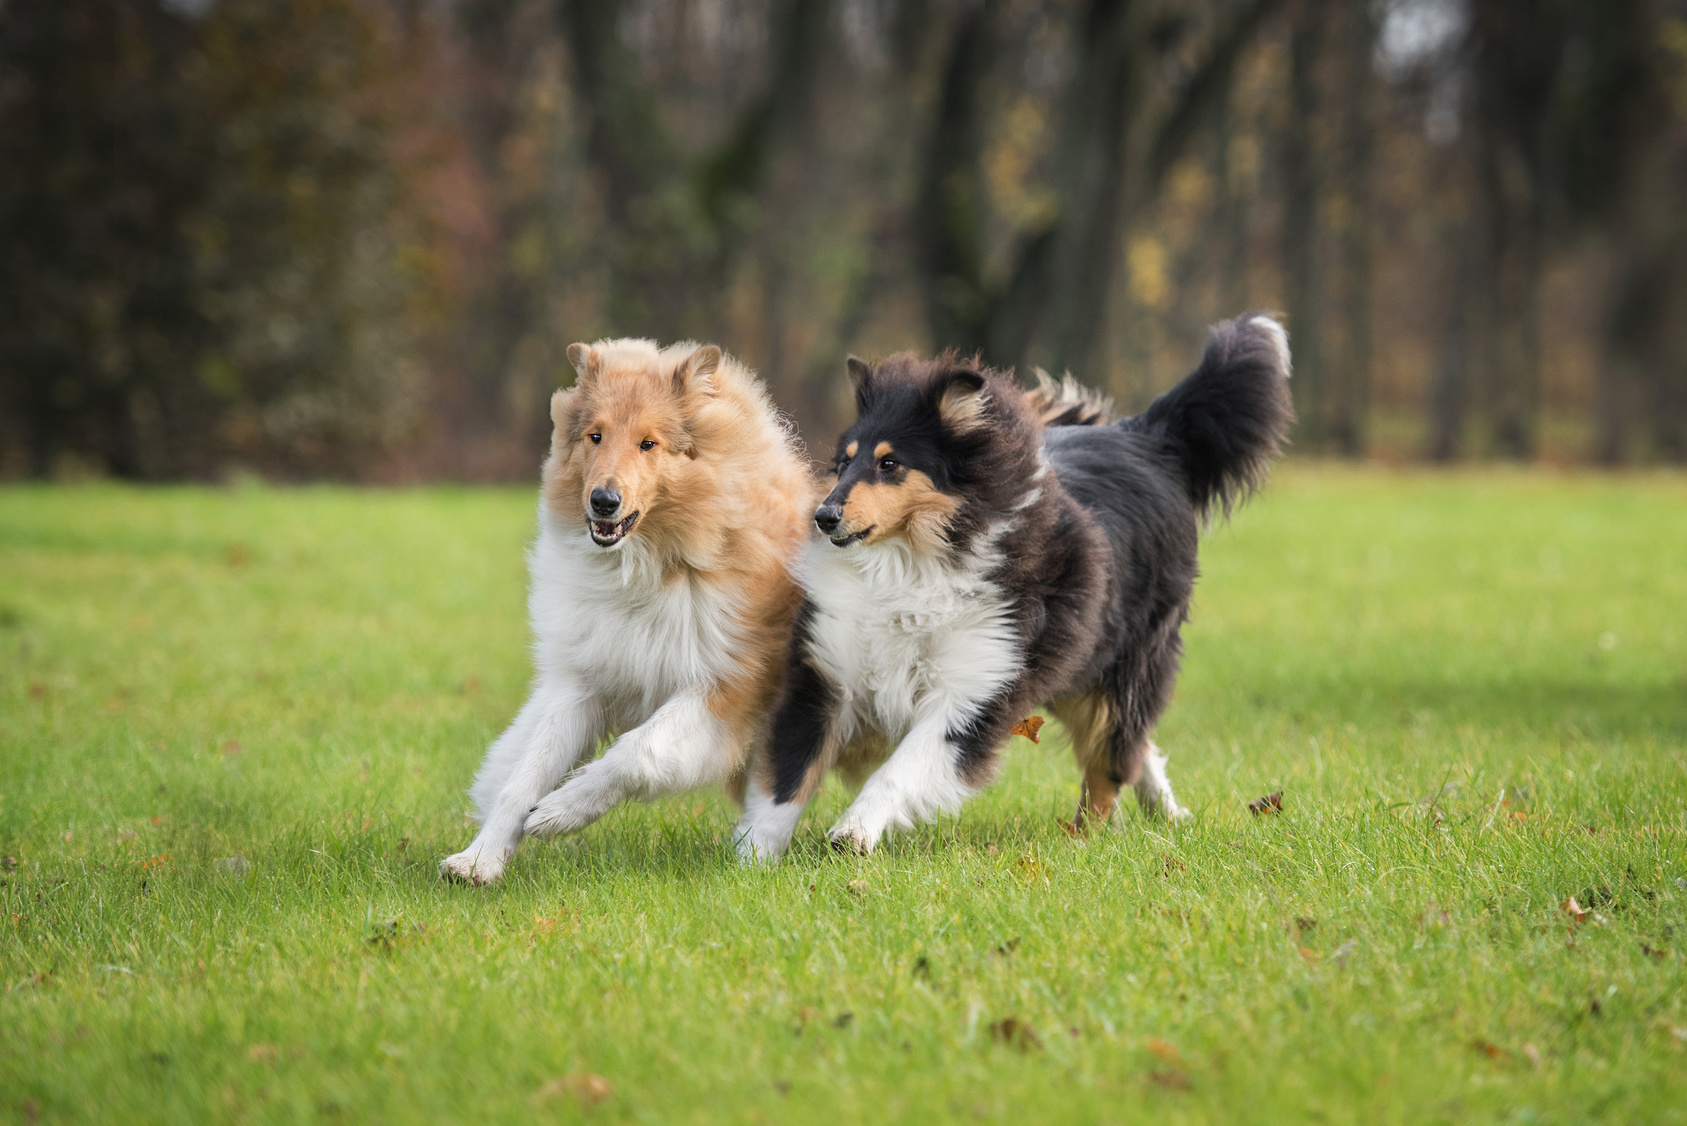 Two rough collie dogs playing and running in autumn